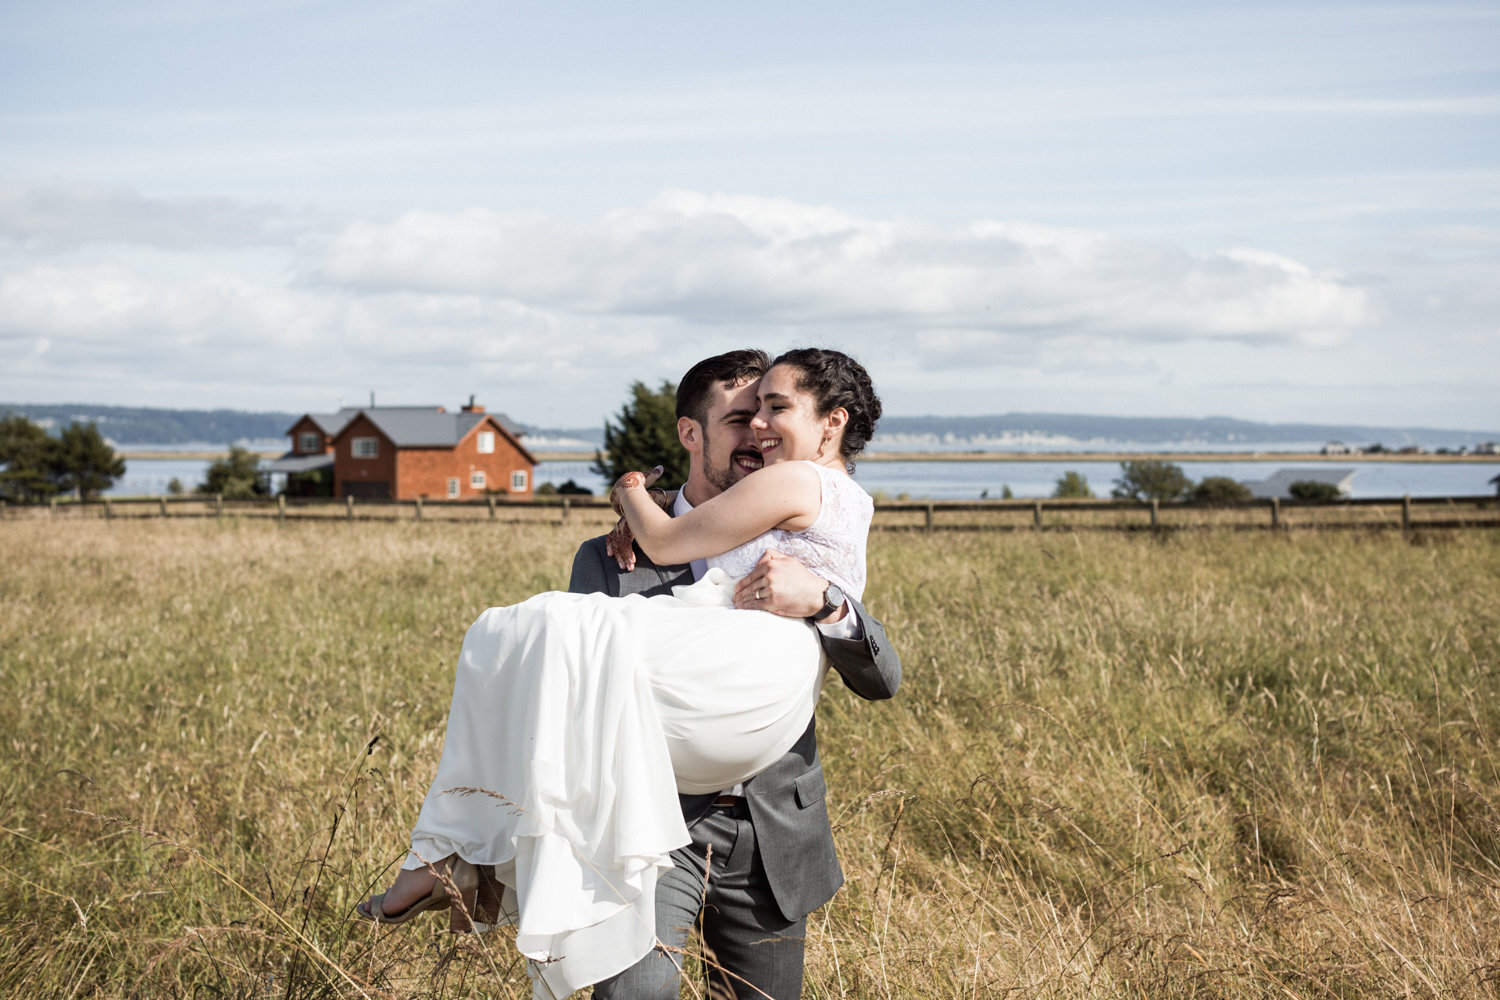 Whidbey Island Bride and Groom photographed by Danielle Motif Photography